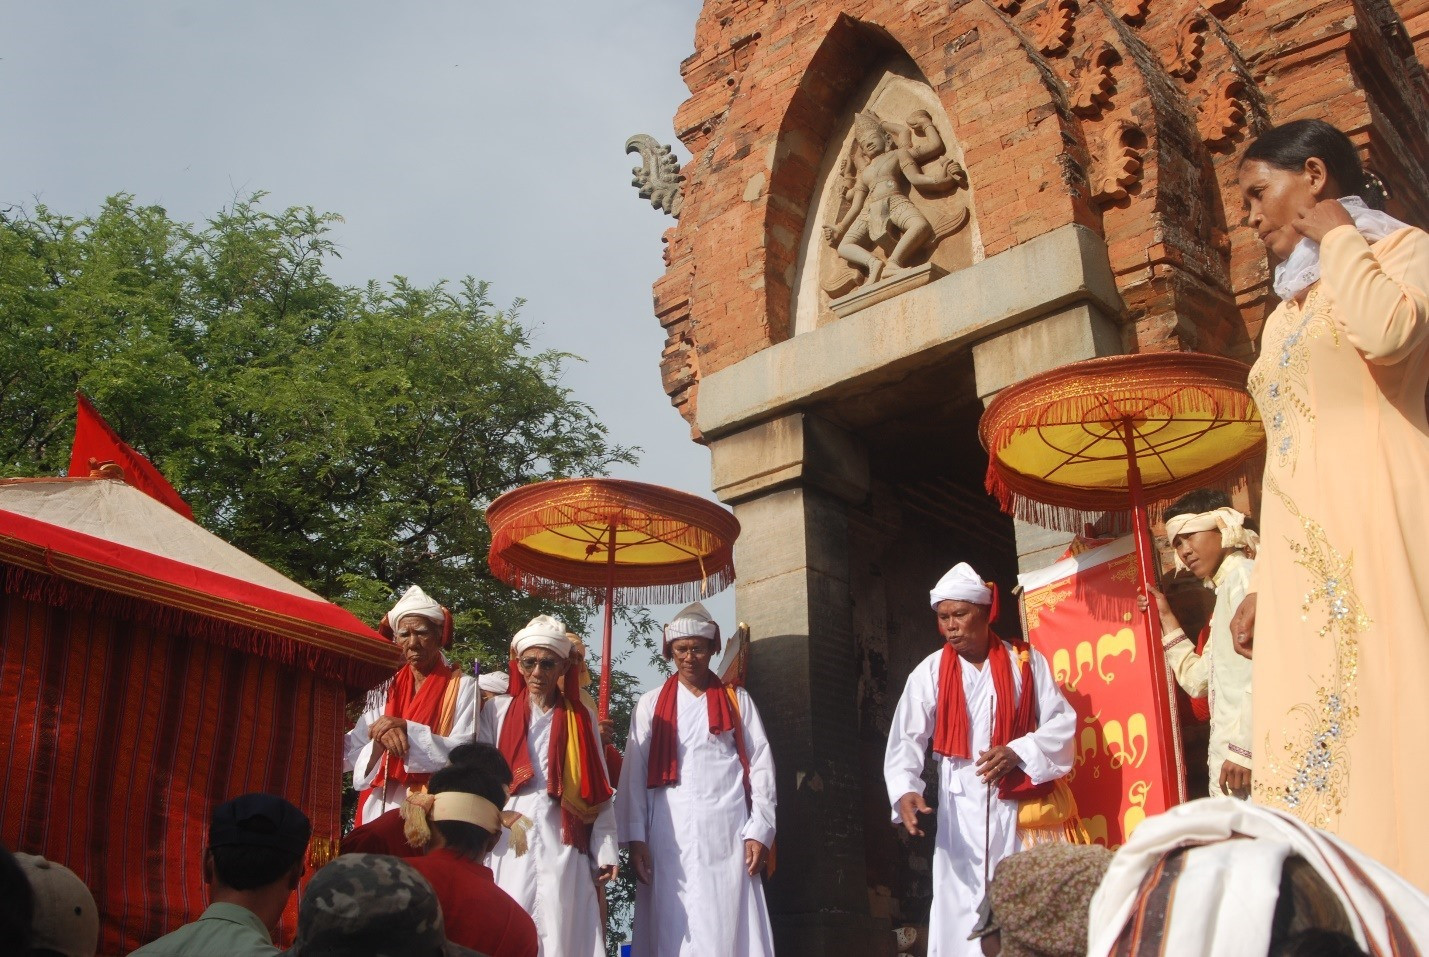 Kate Festival by the Cham people in Ninh Thuan